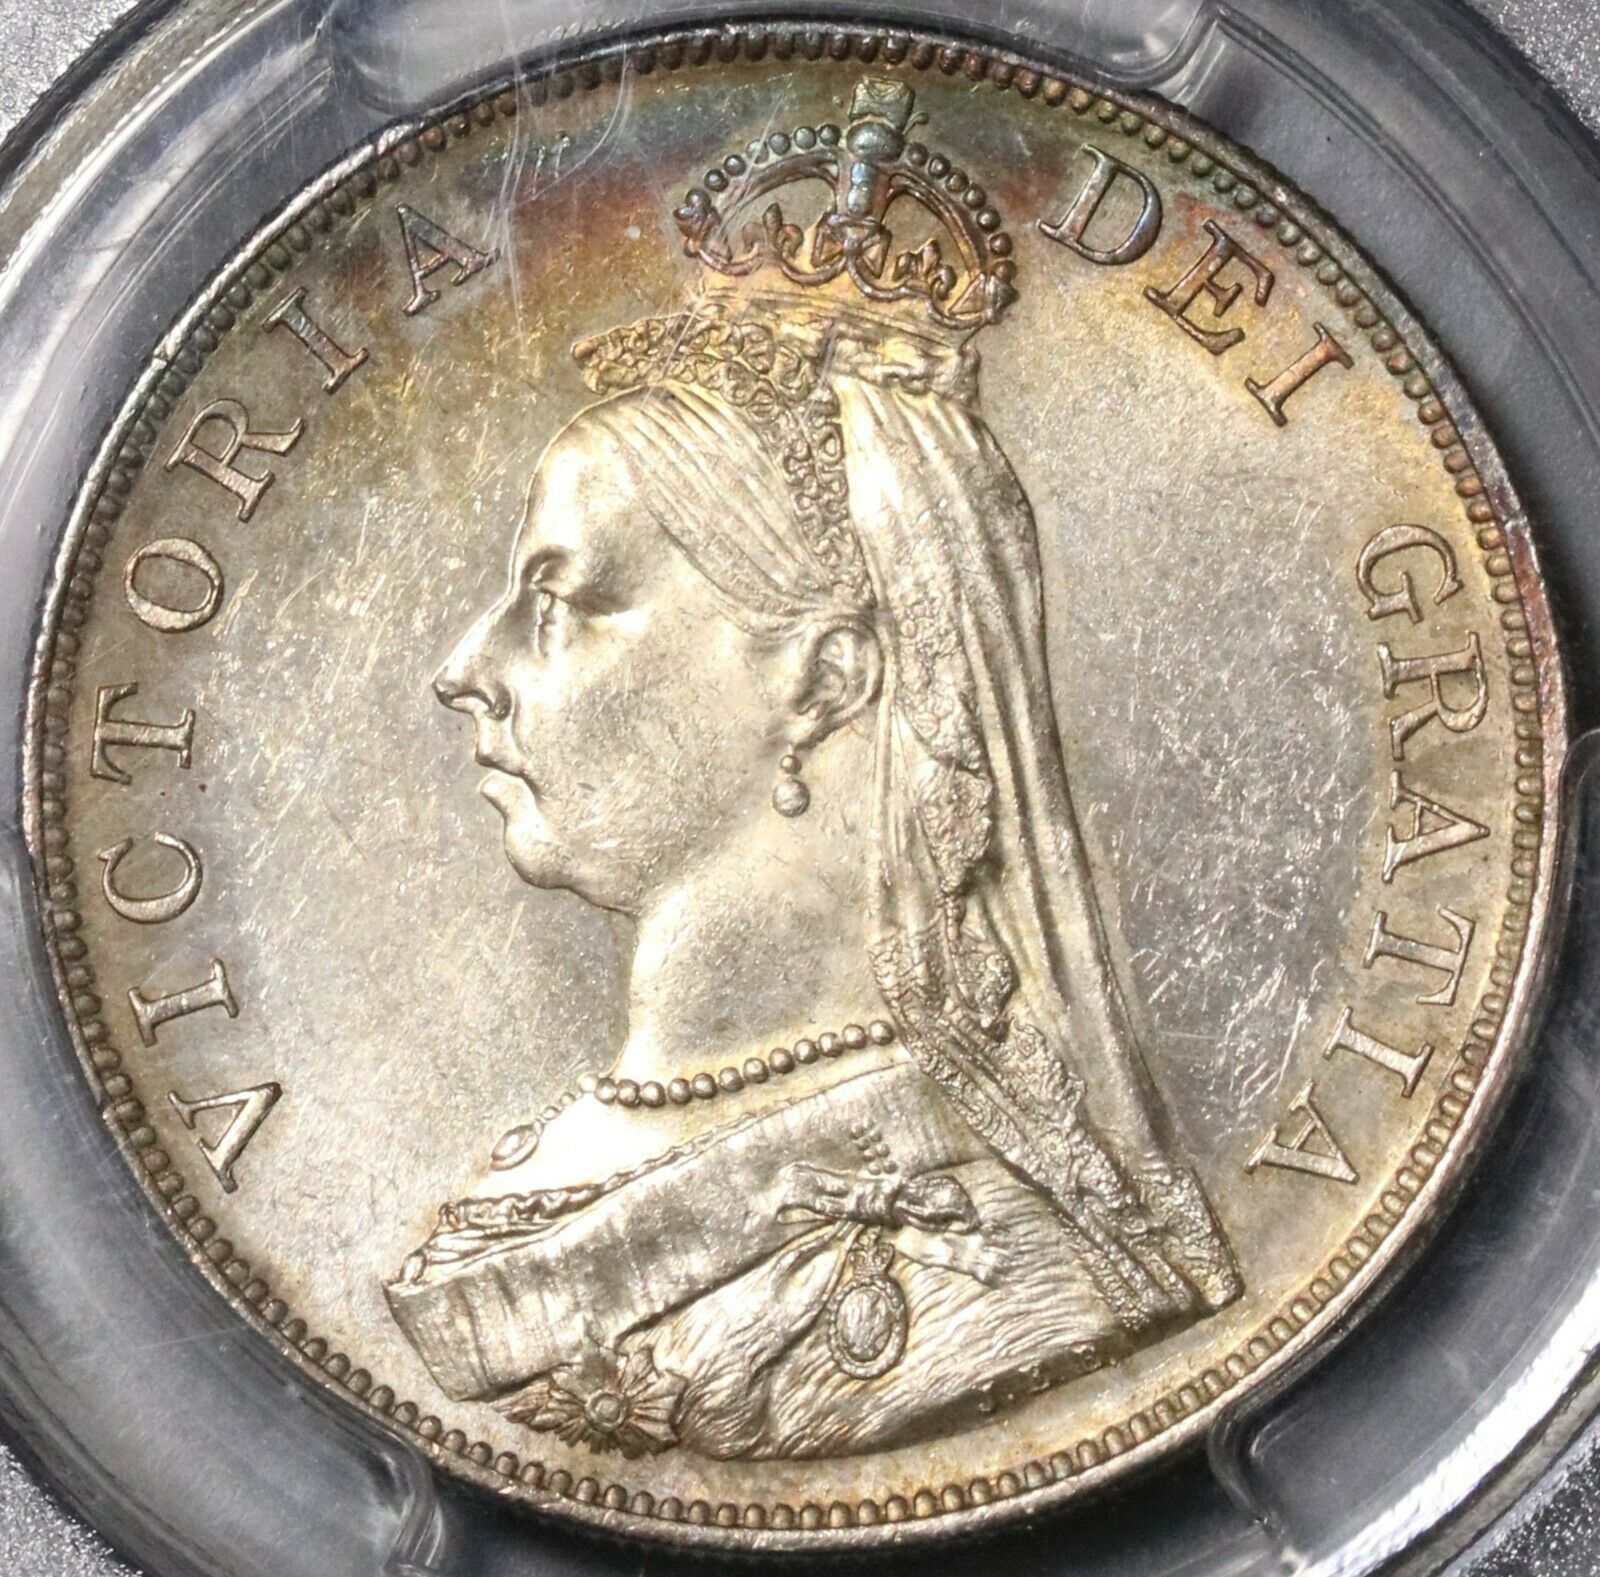 1887 Pcgs Ms 63 Victoria Double Florin 4 Shillings Great Britain Coin (21070402c